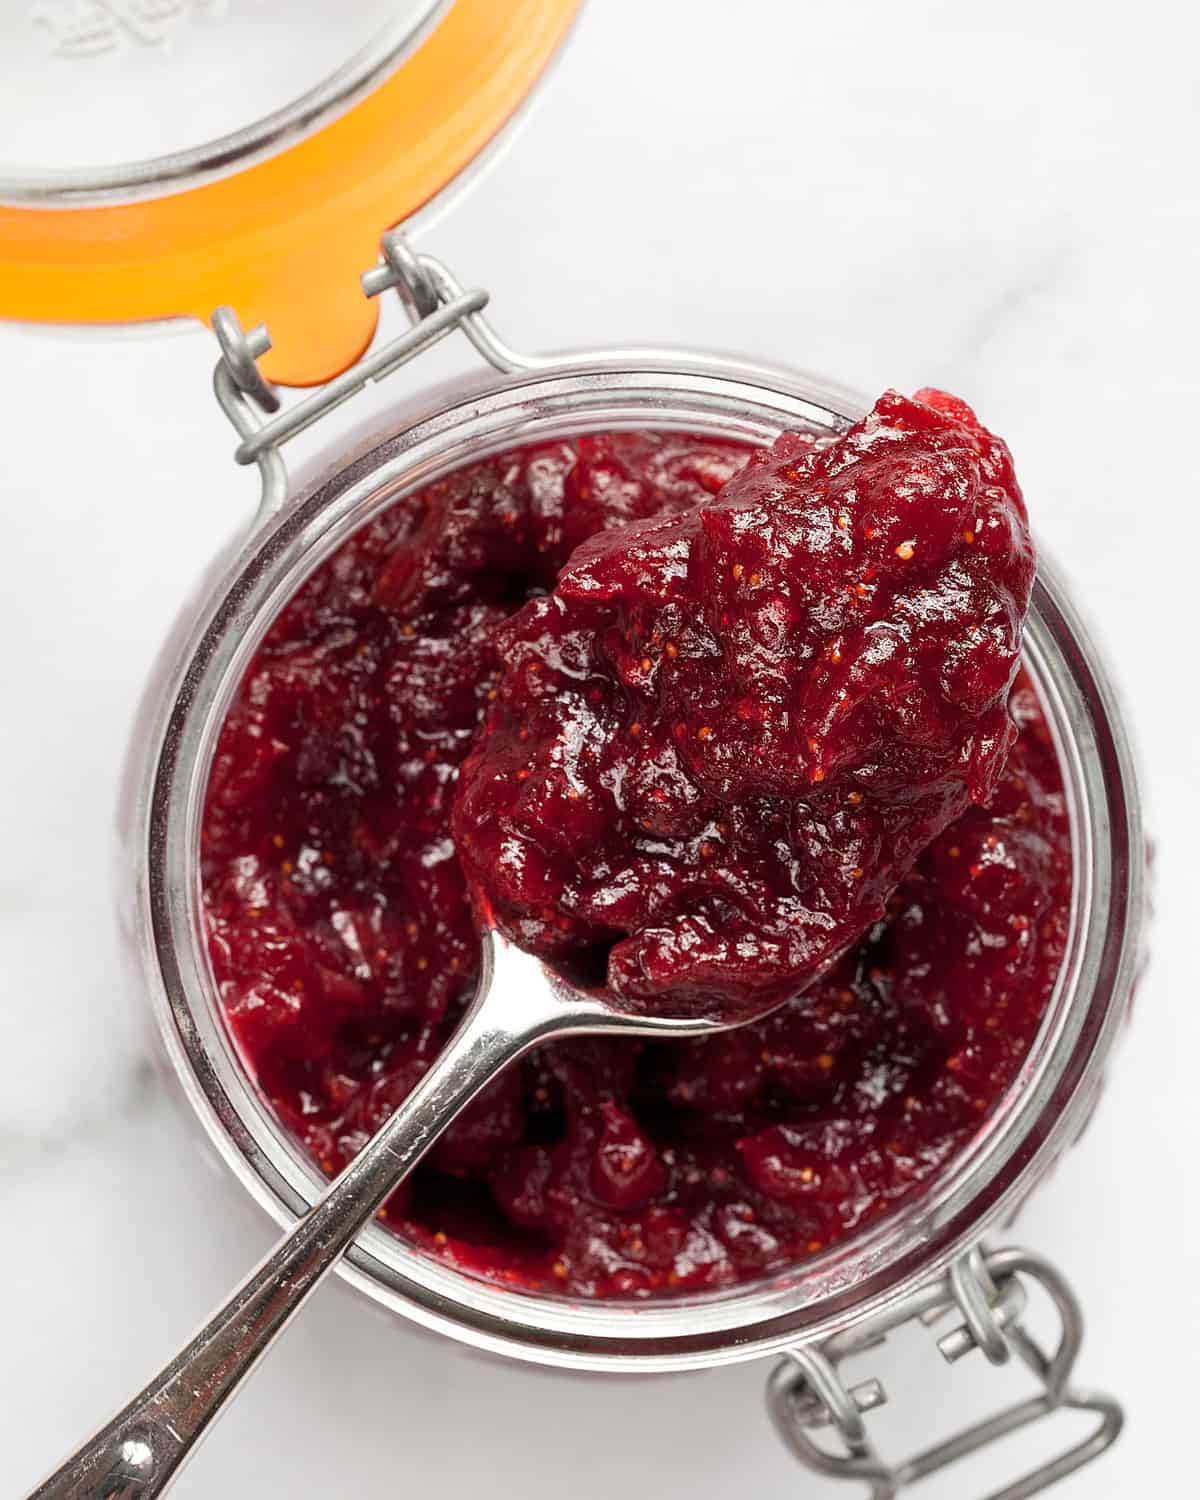 Spoon with cranberry jam sitting on a jar.